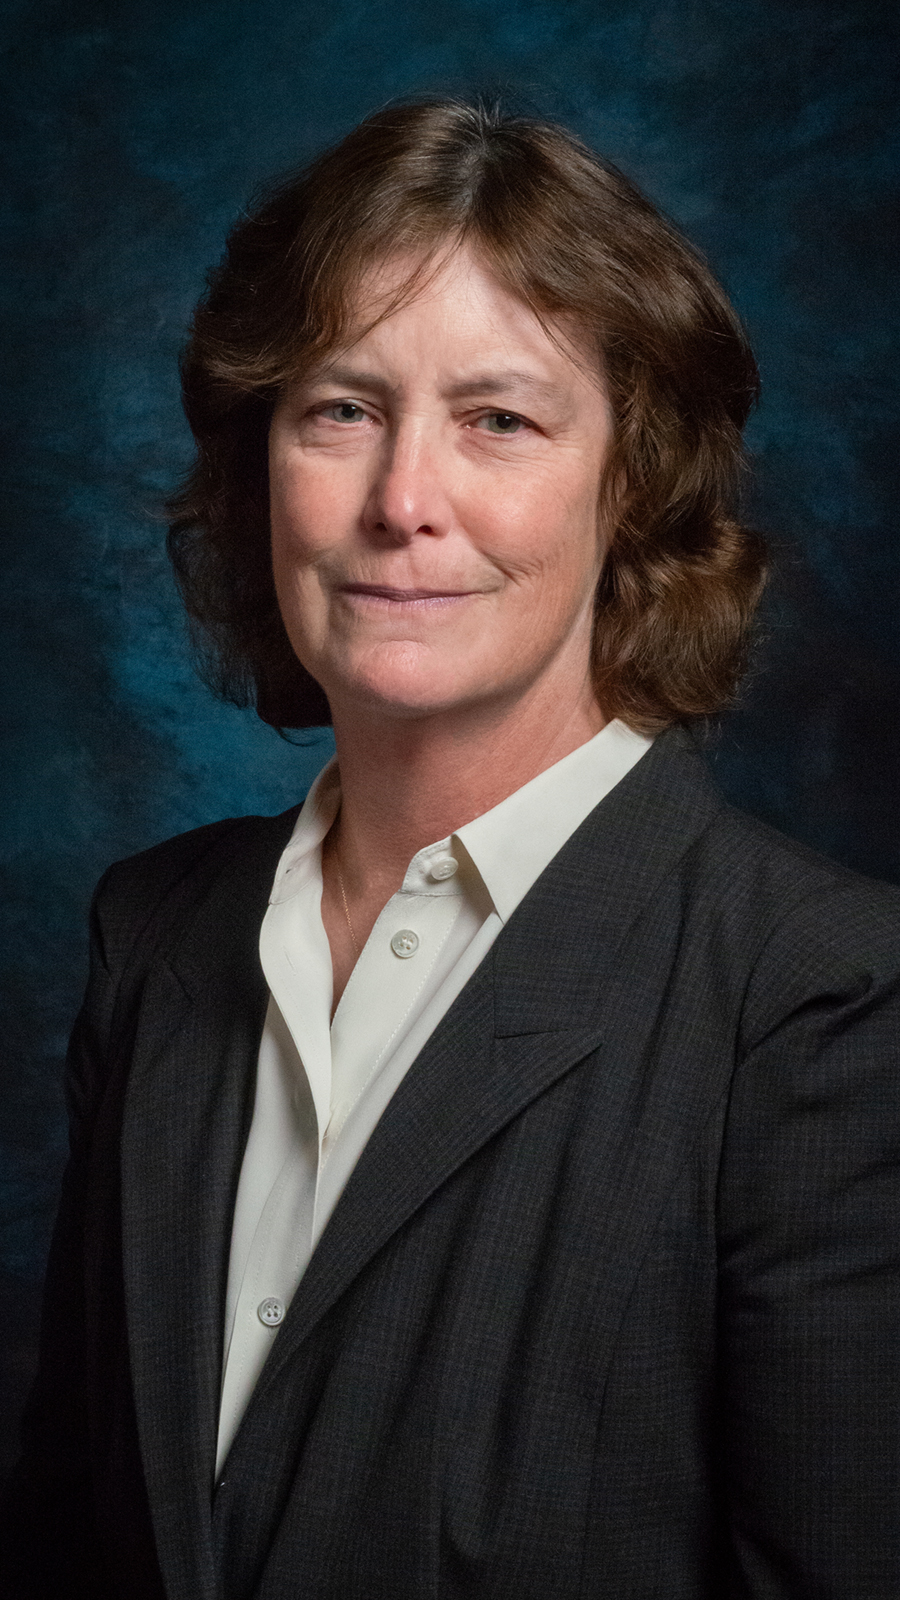 Retired Rear Admiral Liz Young, pictured here, has been appointed to the Space Dynamics Laboratory Board of Directors.